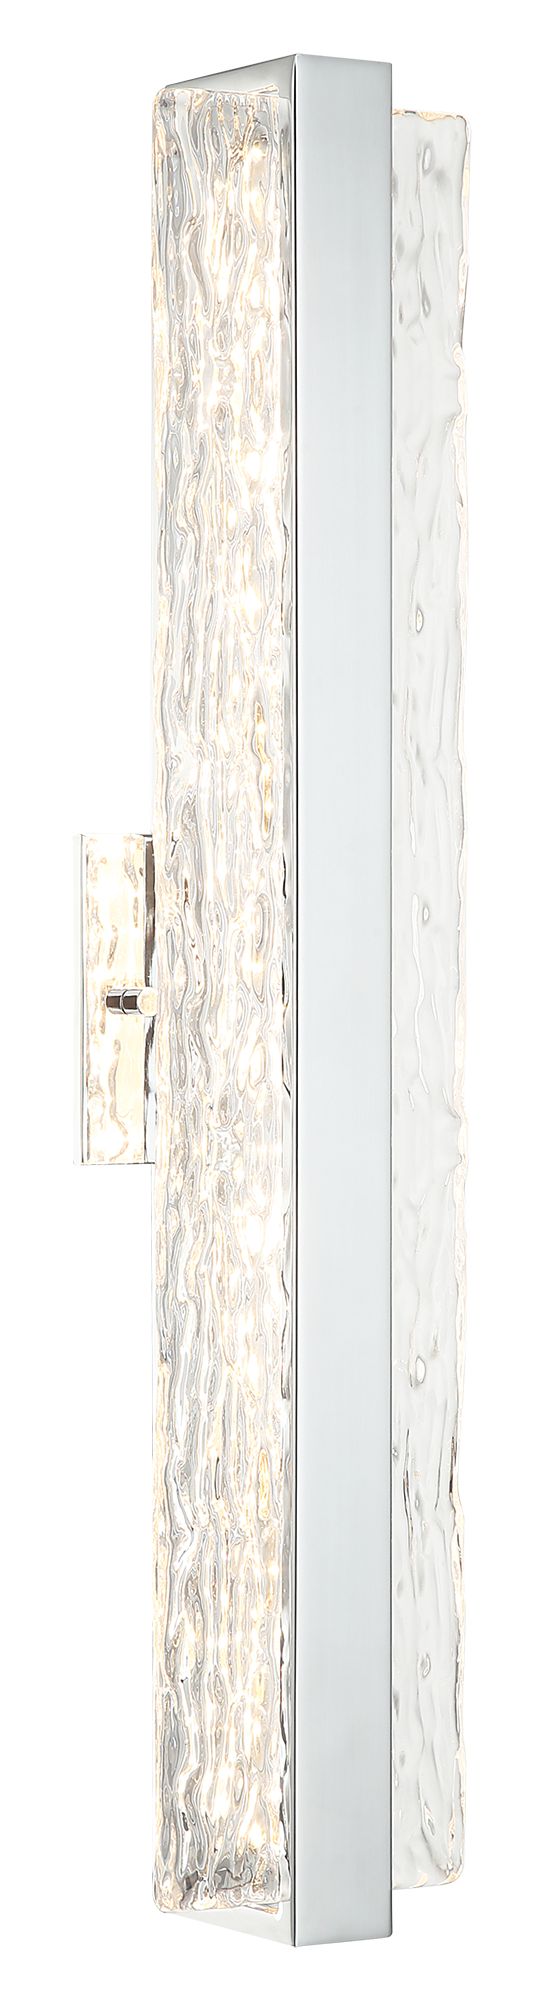 NIAGARA Wall sconce Chrome INTEGRATED LED - S02024CH | MATTEO